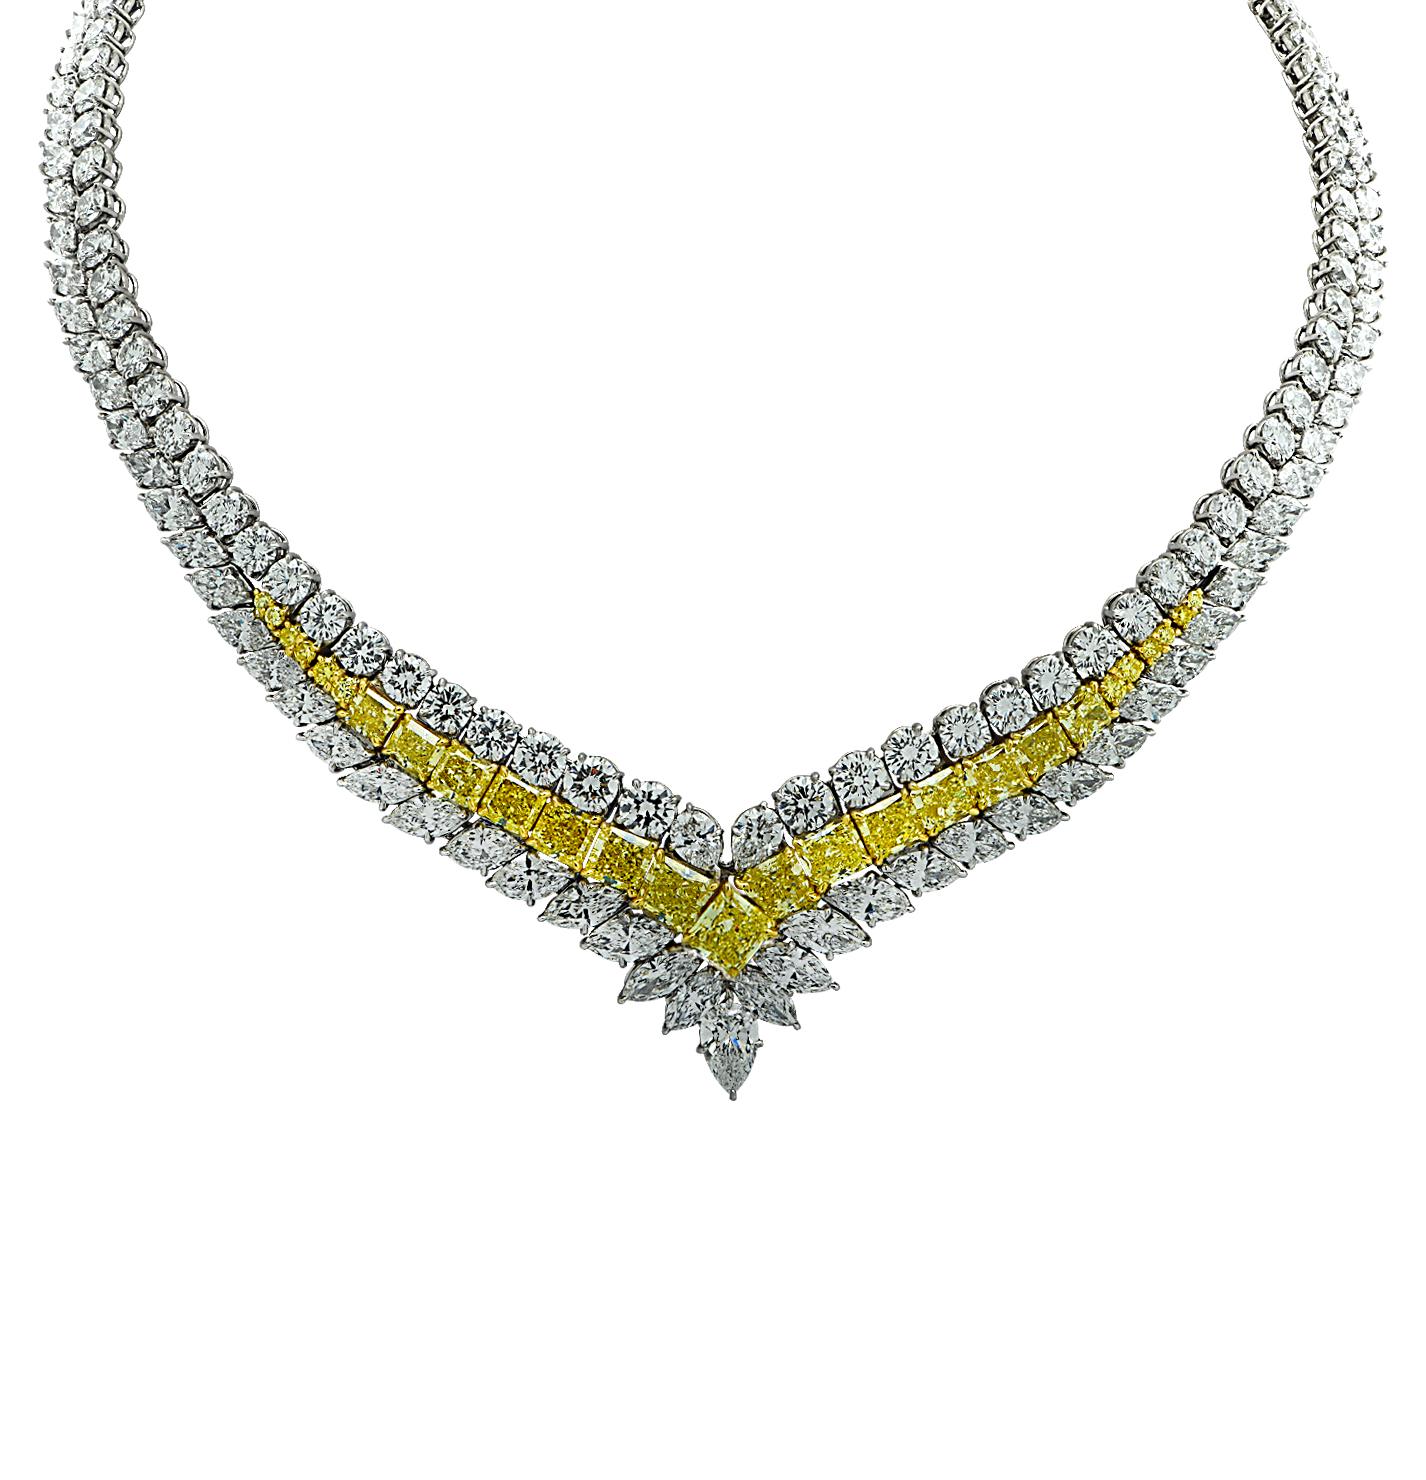 80.81 Carat GIA Certified Fancy Intense Yellow and White Diamond Necklace In New Condition For Sale In Miami, FL